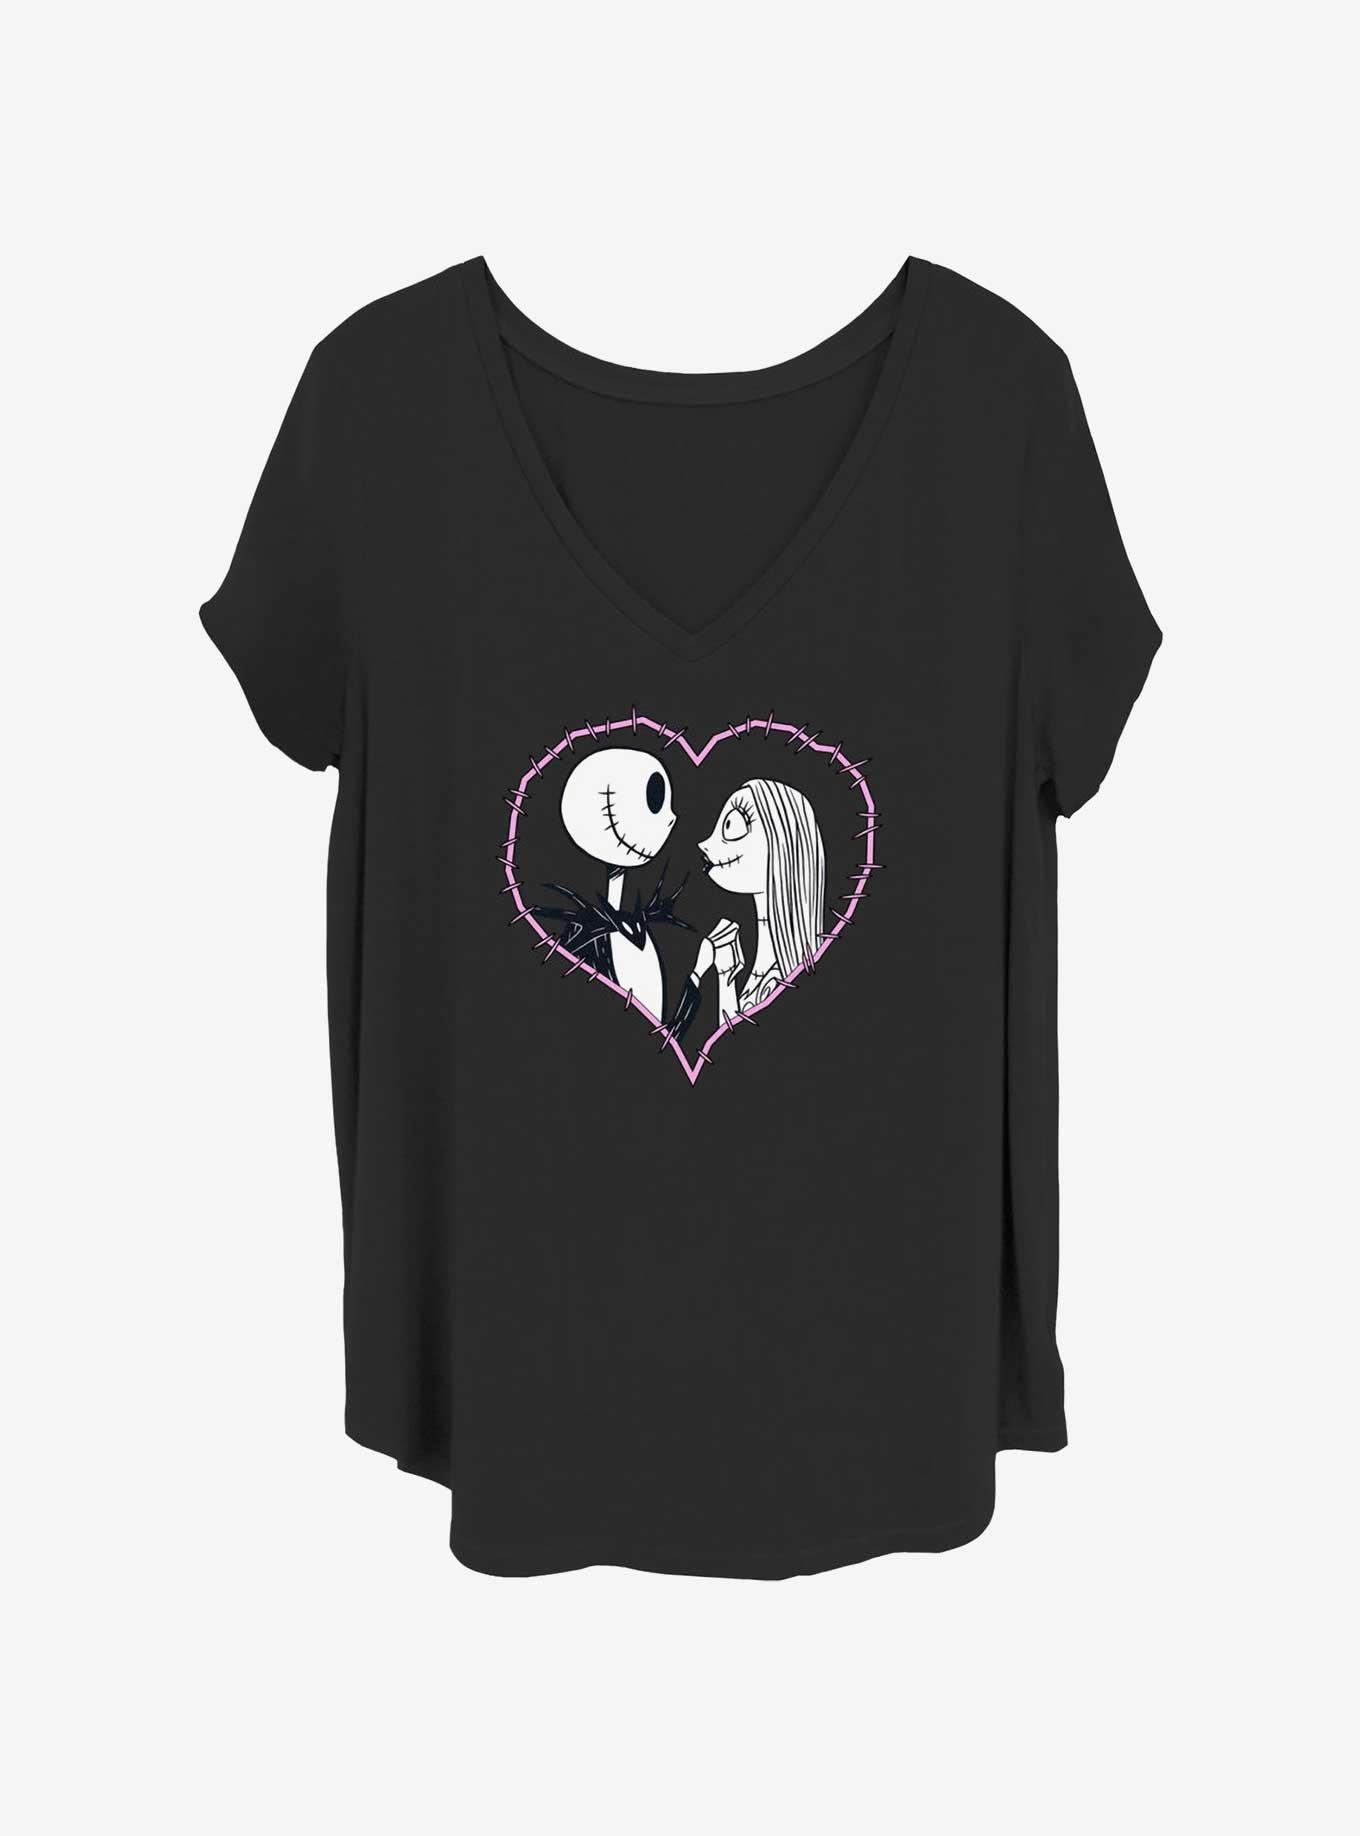 Disney The Nightmare Before Christmas Jack and Sally Heart Stitch Girls T-Shirt Plus Size, BLACK, hi-res